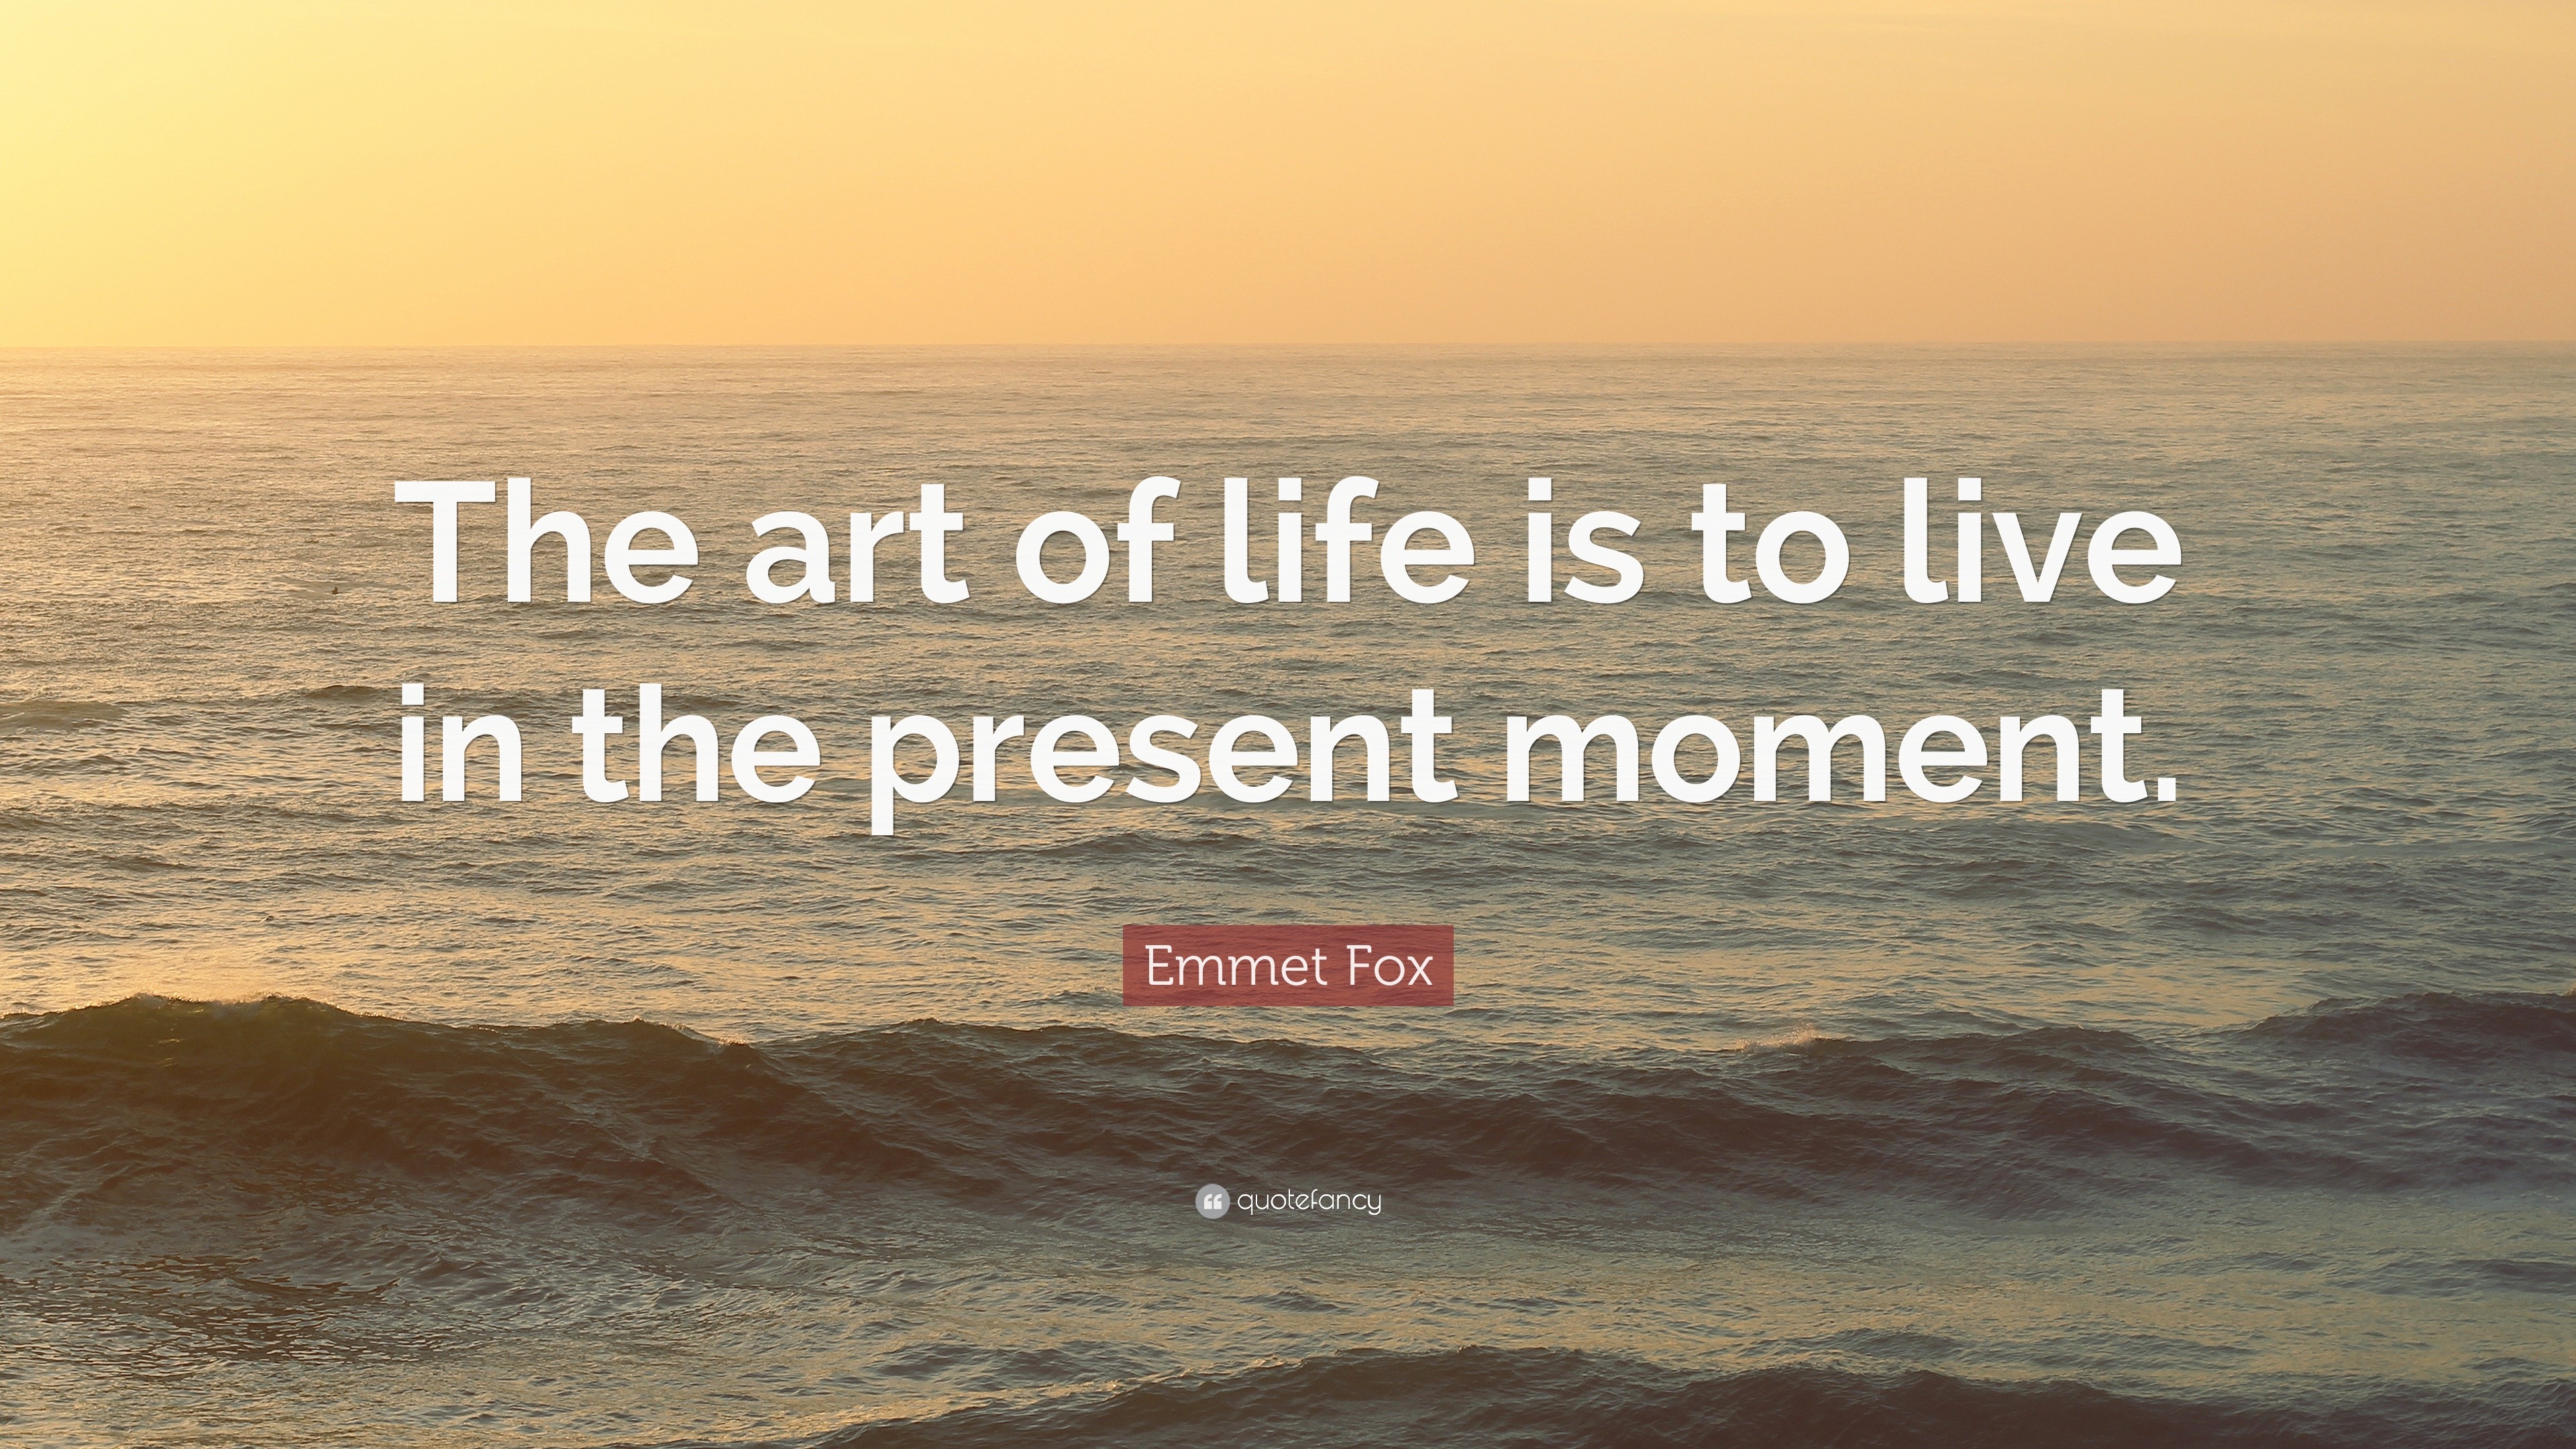 Emmet Fox Quote “The art of life is to live in the present moment